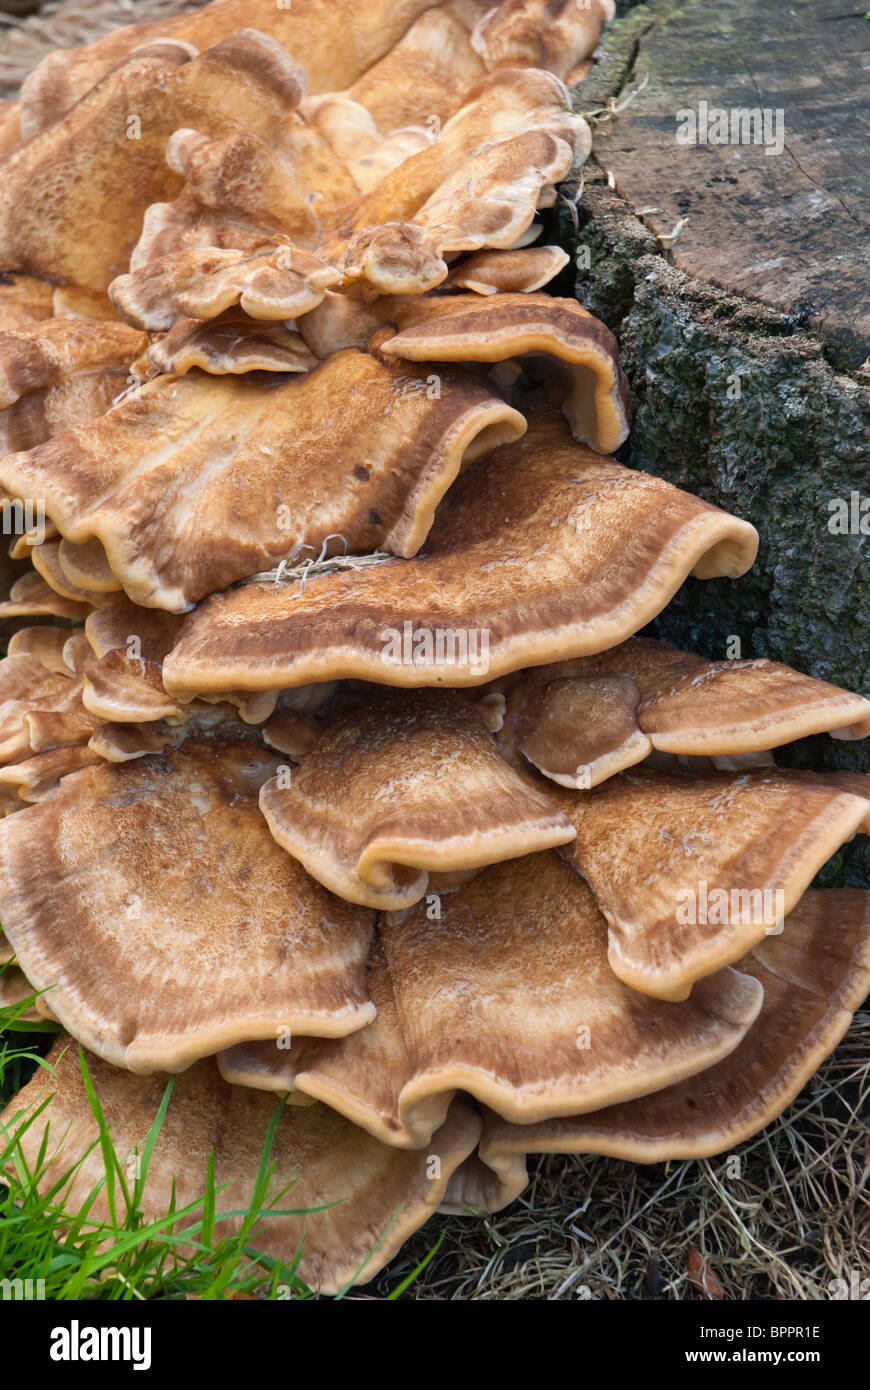 A variegated or versicoloured polypore bracket fungus growing on a sycamore tree stump in Scotland Stock Photo